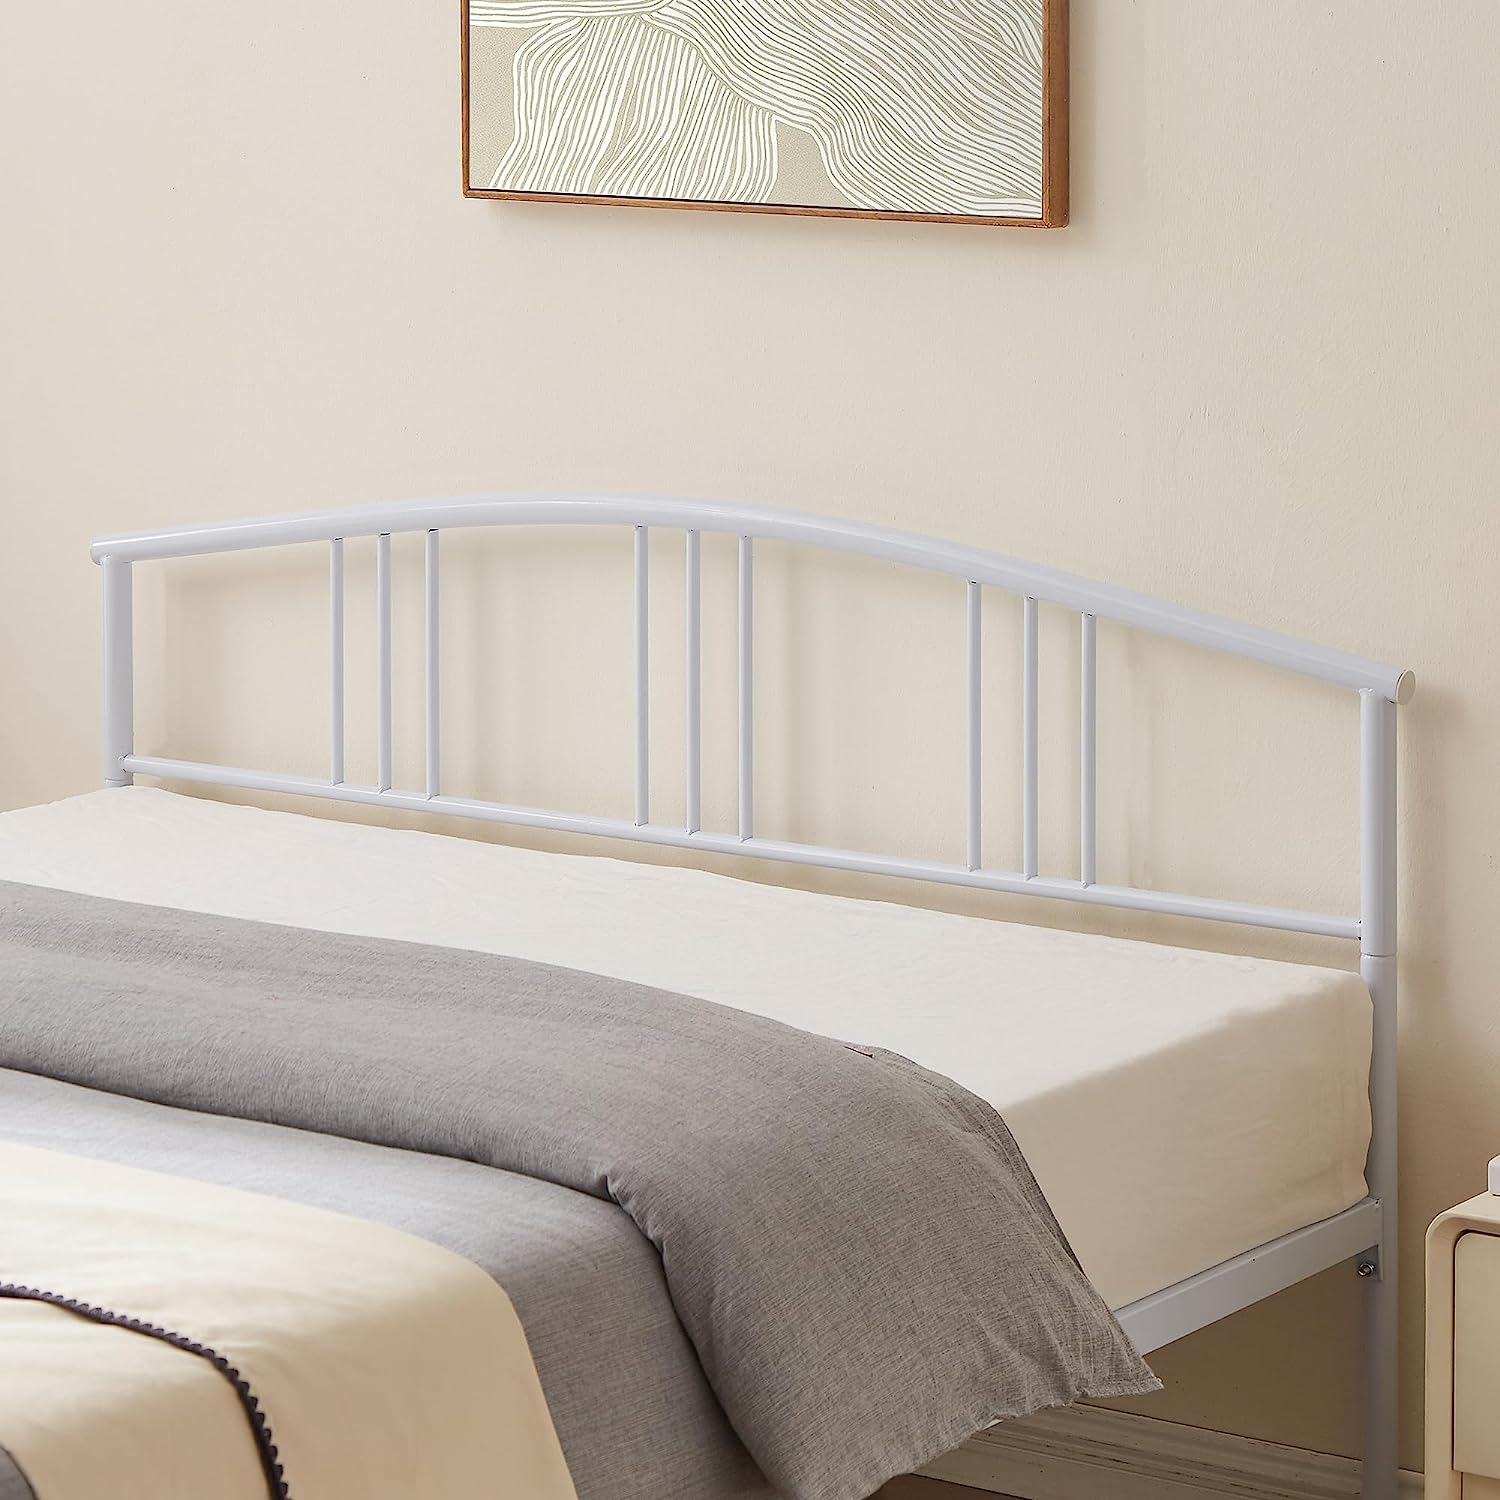 VECELO Metal Bed Frame Mattress Foundation with headboard and Footboard